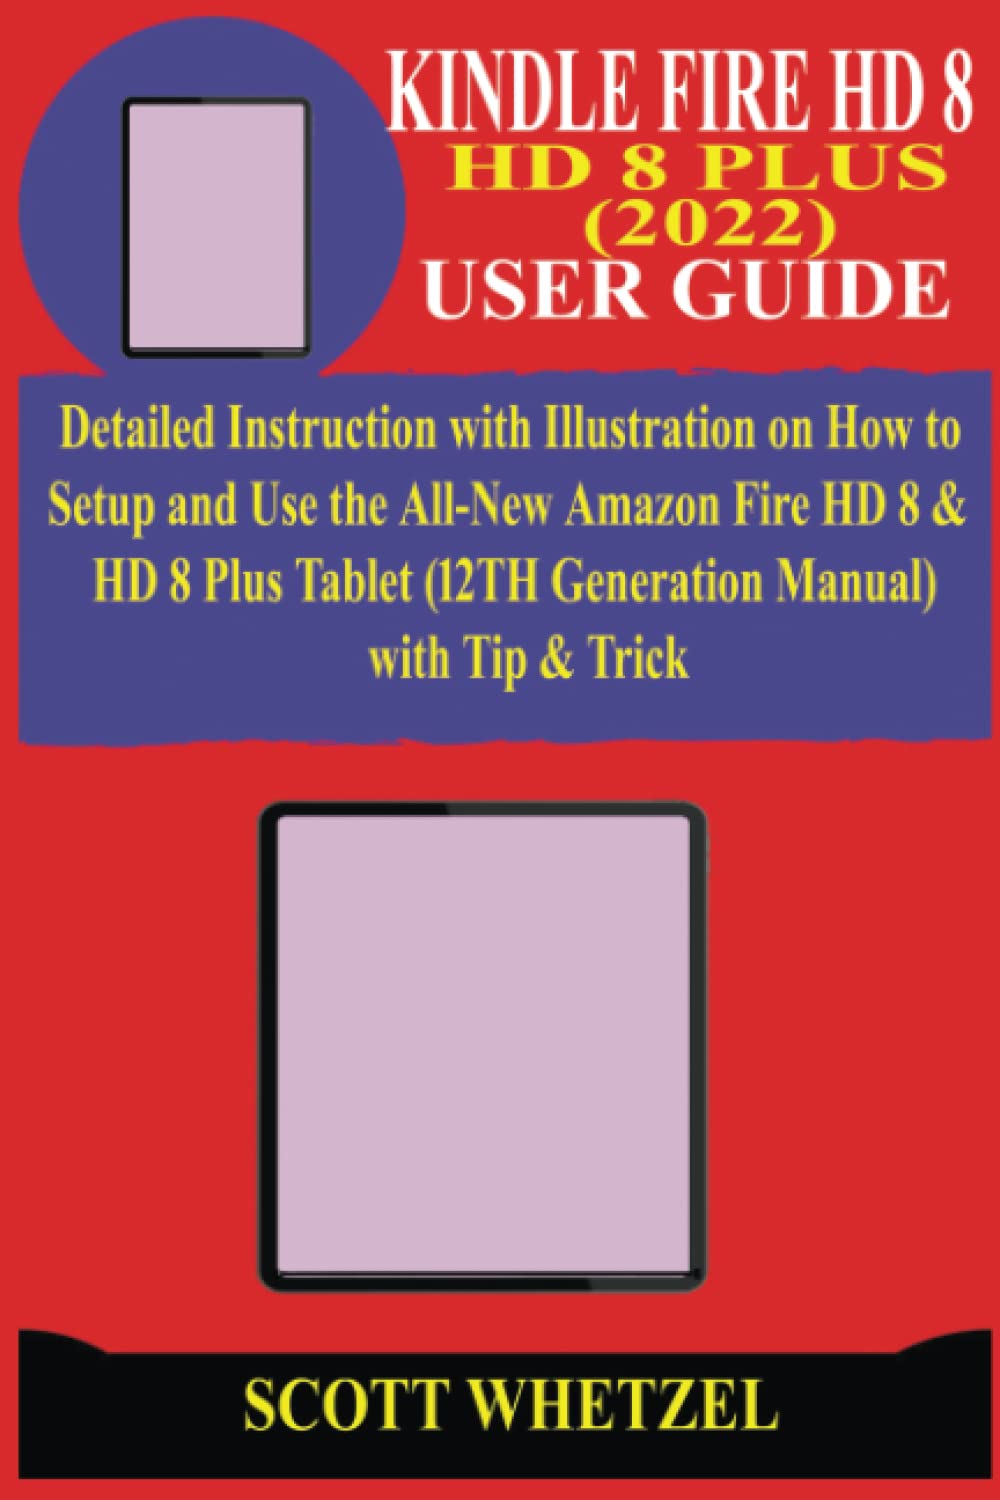 KINDLE FIRE HD 8 & HD 8 PLUS (2022) USER GUIDE: Detailed Instruction with Illustration on How to Setup and Use the All-New Amazon Fire HD 8 & HD 8 Plus Tablet (12TH Generation Manual) with Tip & Trick